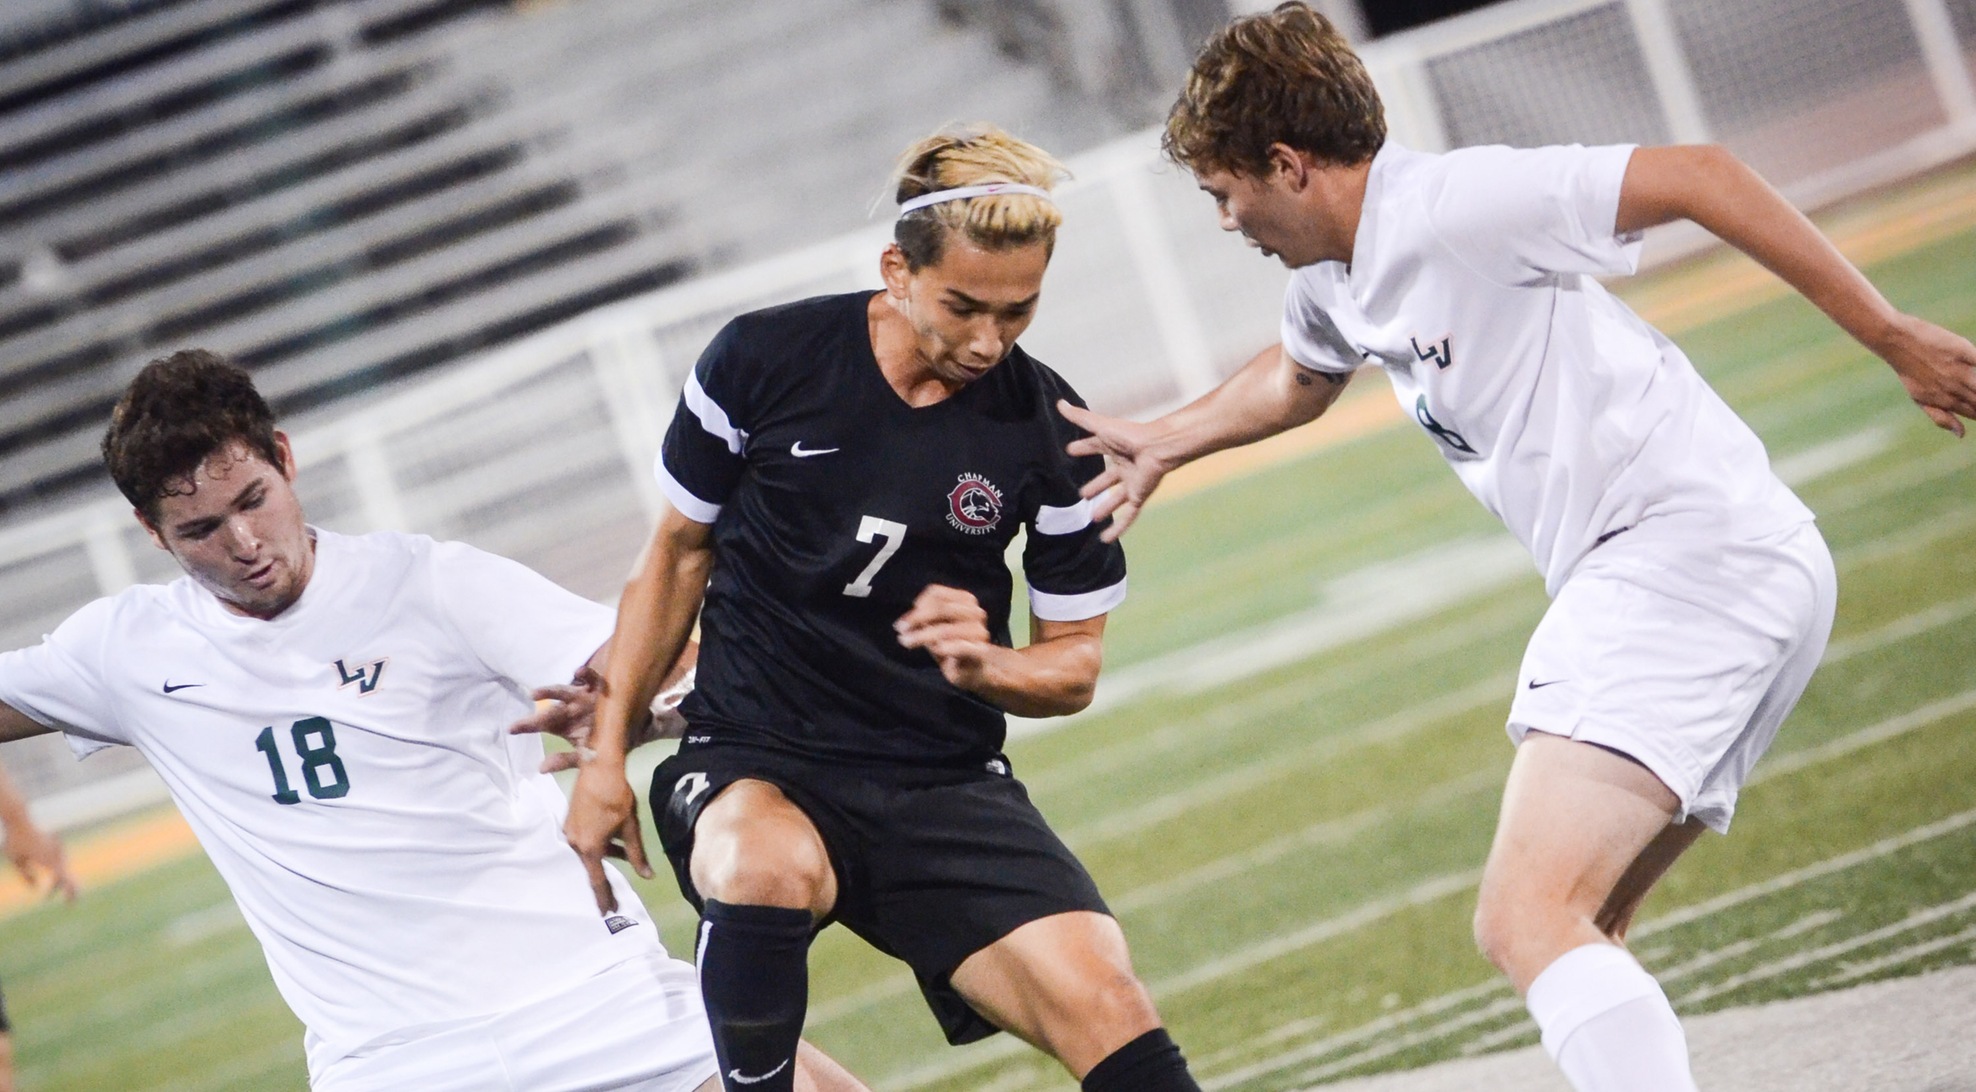 Late goals hurt Men's Soccer in loss to Occidental